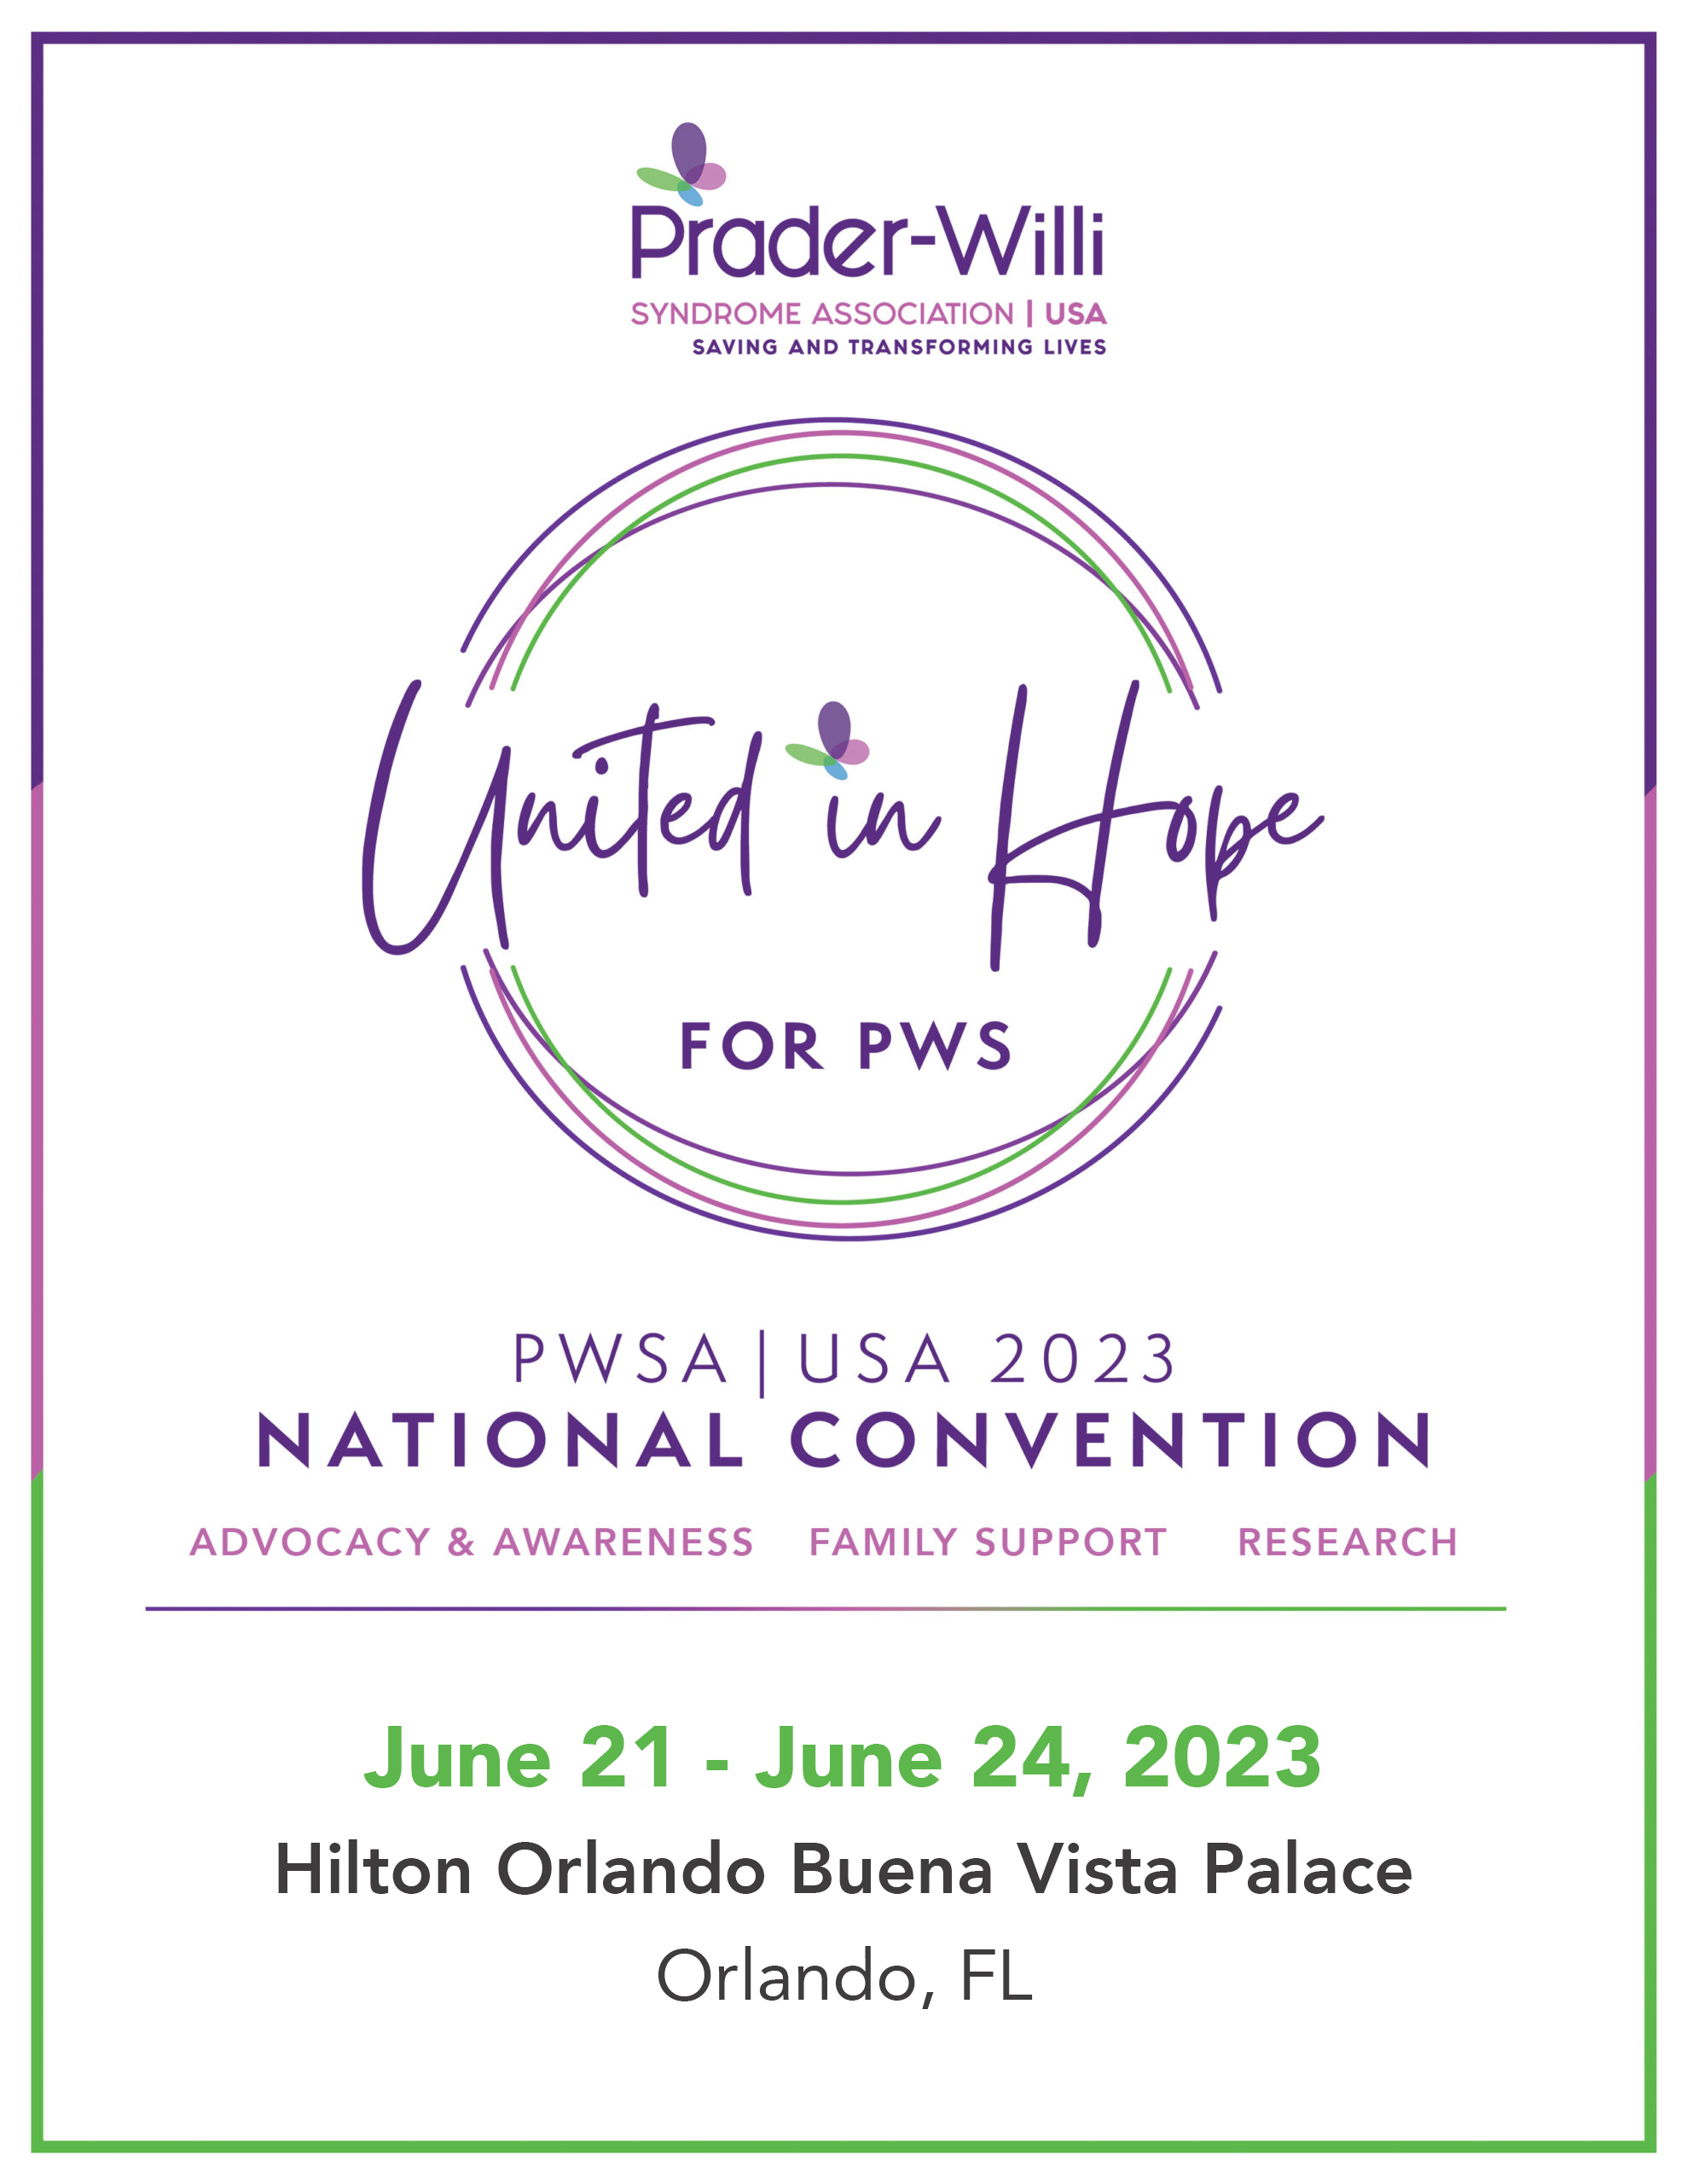 Save The Date PWSA Convention 2023 Scaled 1, Prader-Willi Syndrome Association | USA